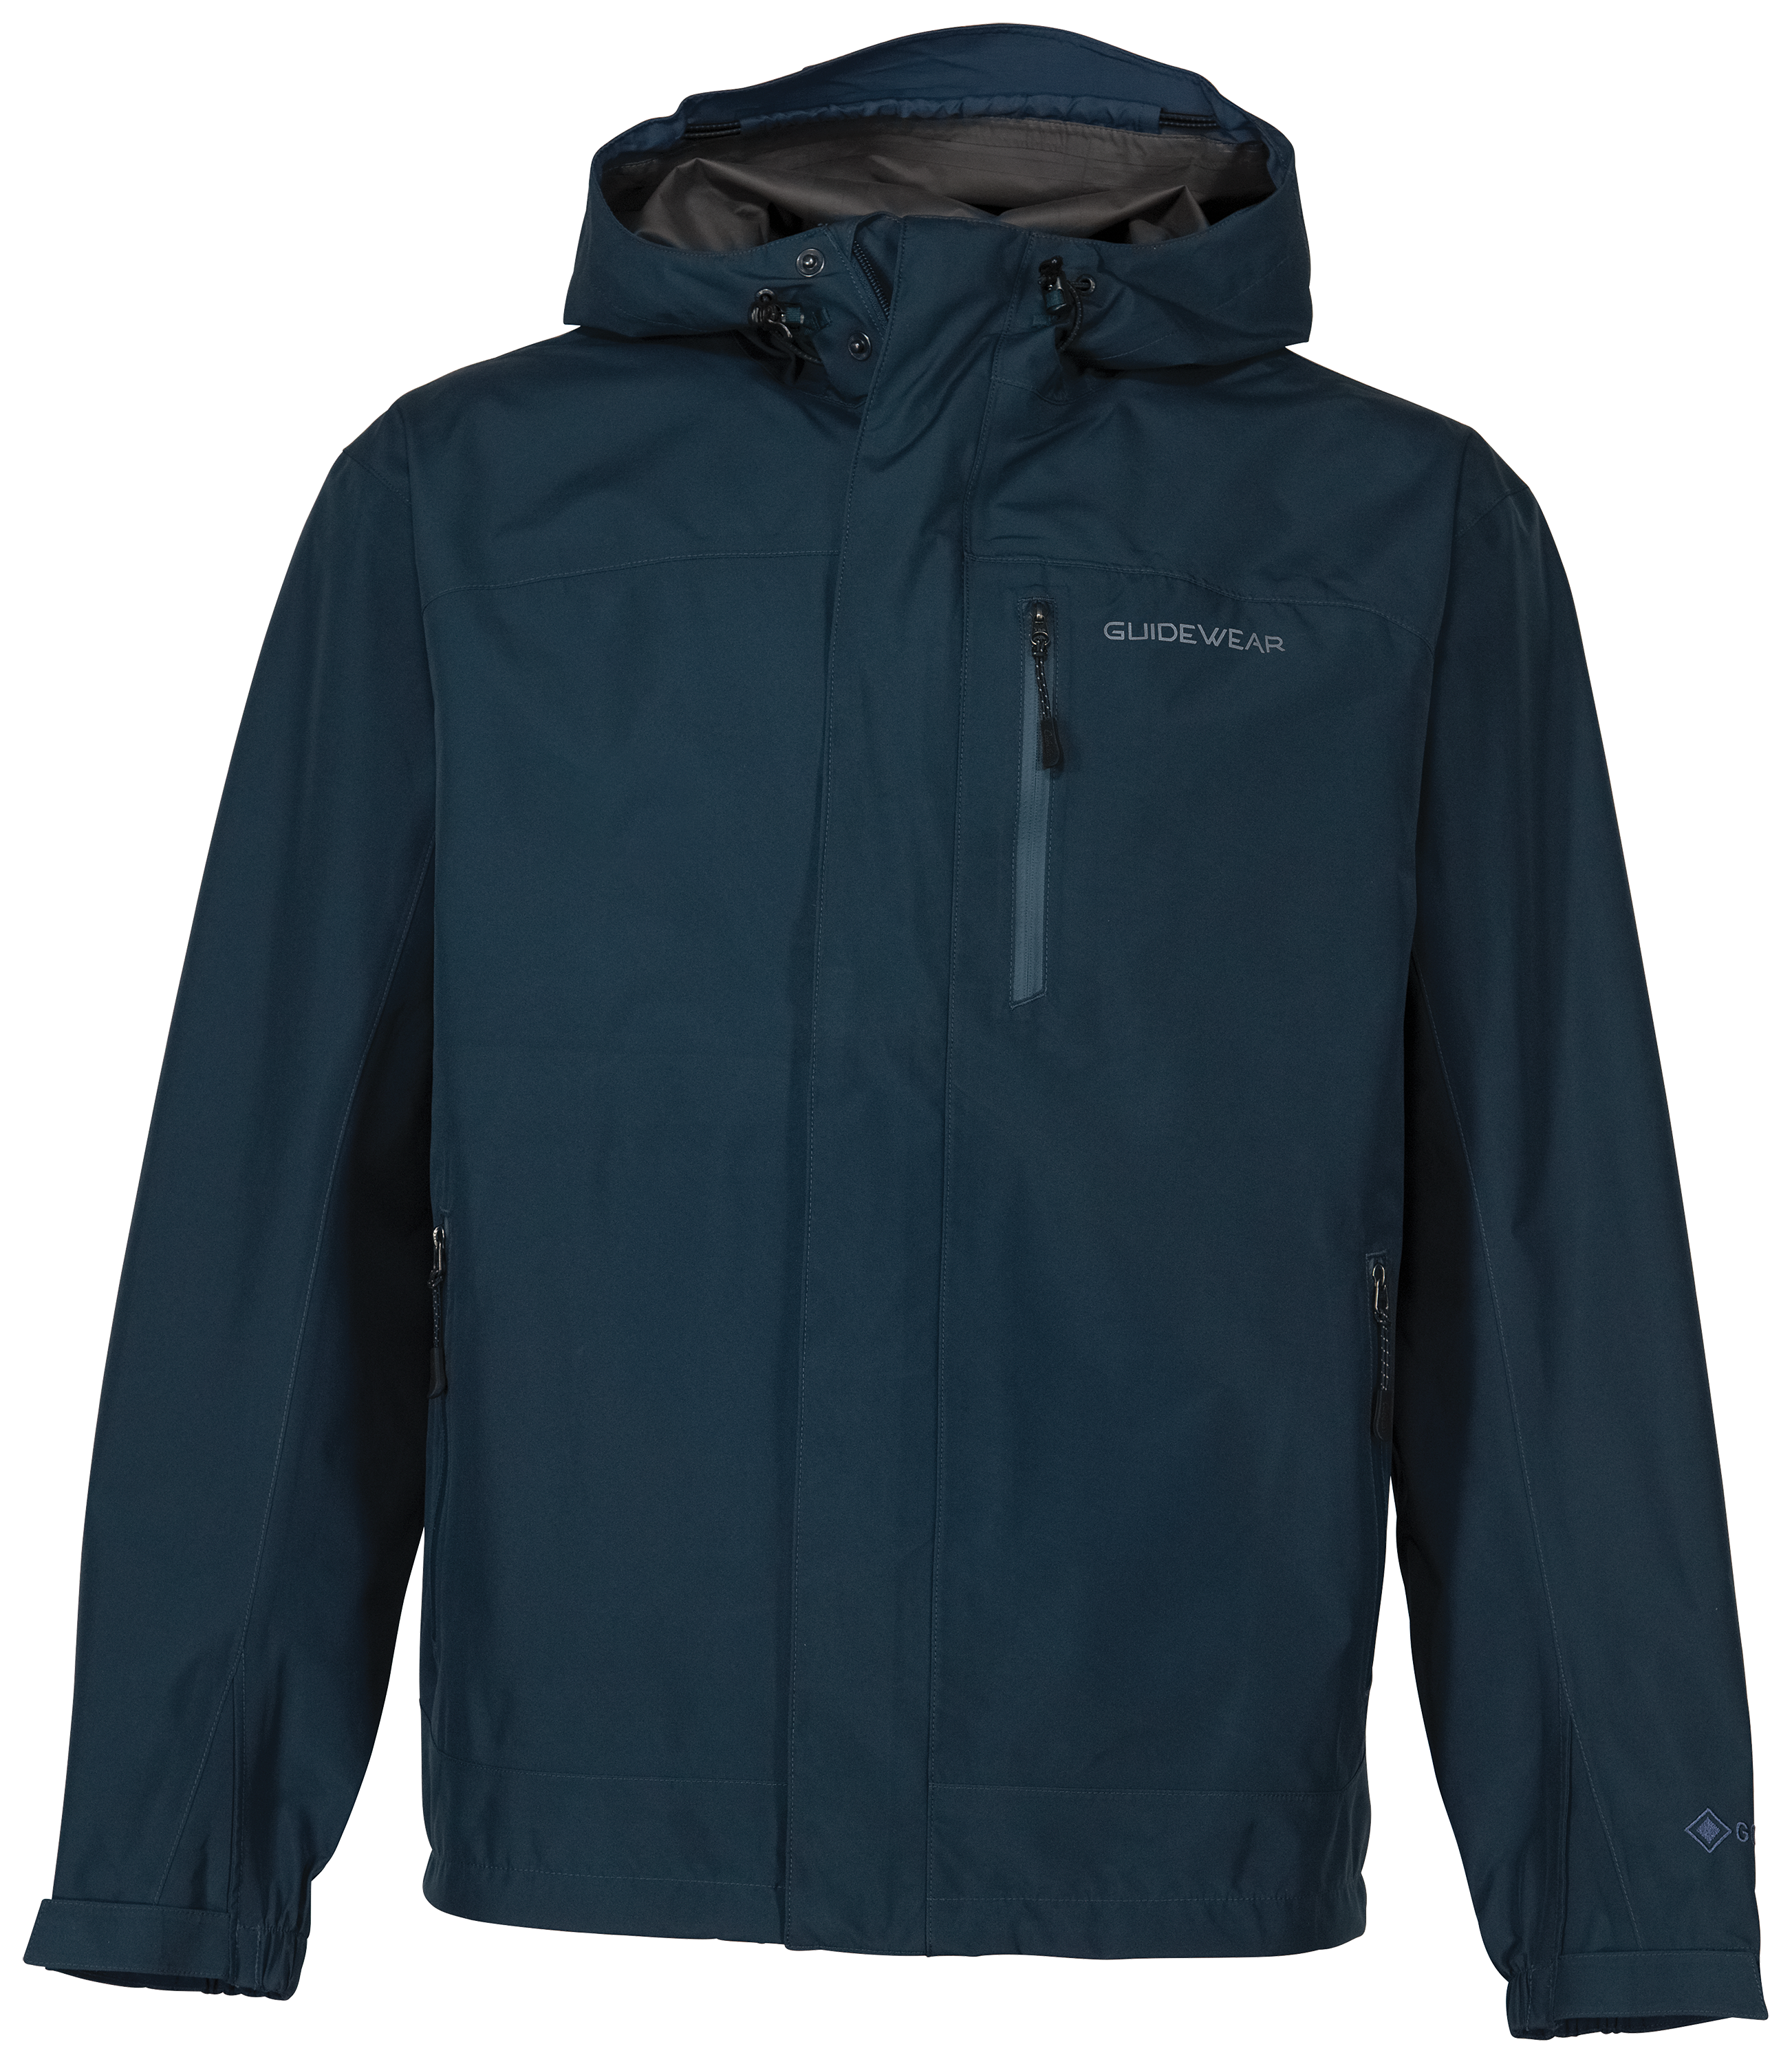 Johnny Morris Bass Pro Shops Guidewear Rainy River Jacket with GORE-TEX PacLite for Men - Shadow Blue - 2XL